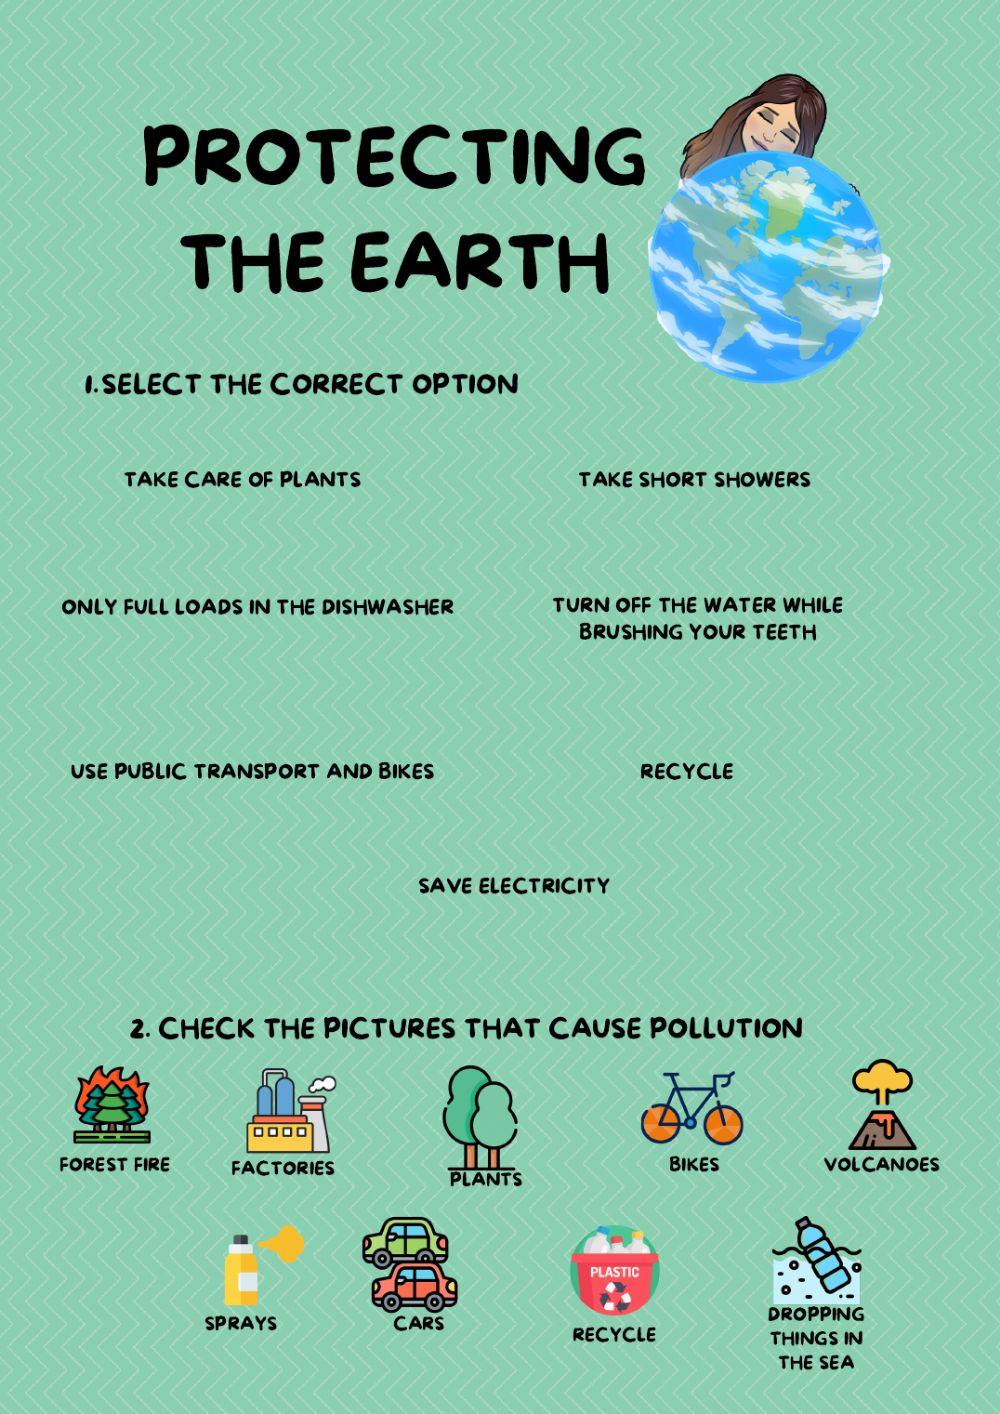 Protecting the earth